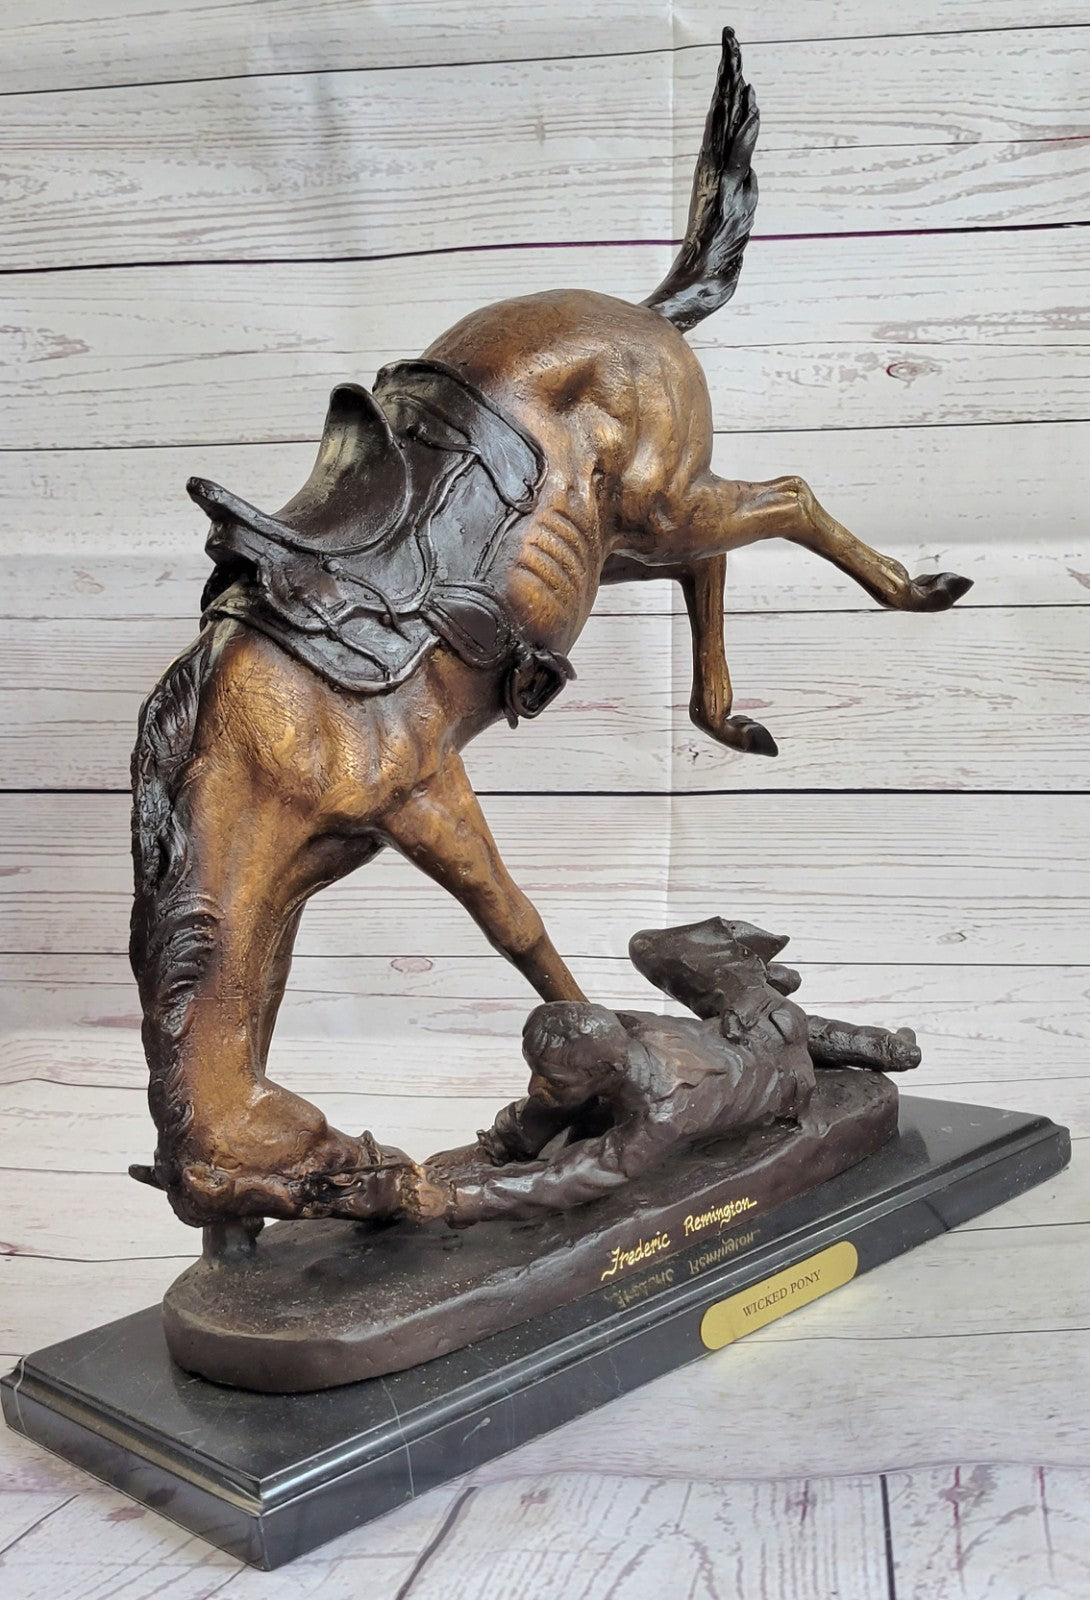 Handcrafted bronze sculpture SALE Decor Art Remington Frederic By Pony Wicked